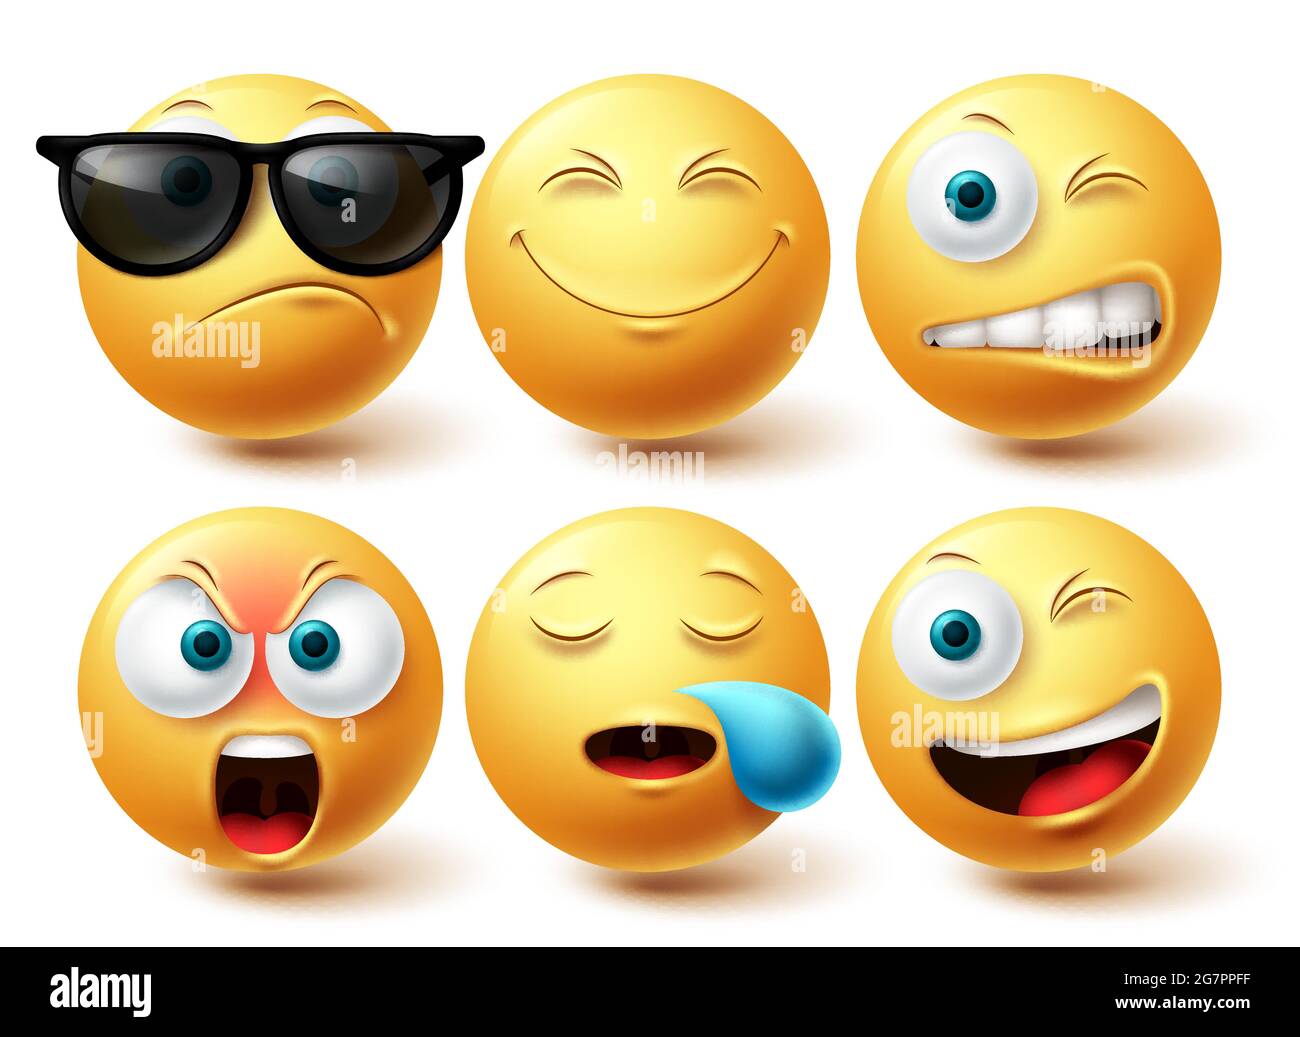 Smiley cool emoji vector set. Smileys emoticon yellow icon collection isolated in white background for graphic elements design. Vector illustration Stock Vector